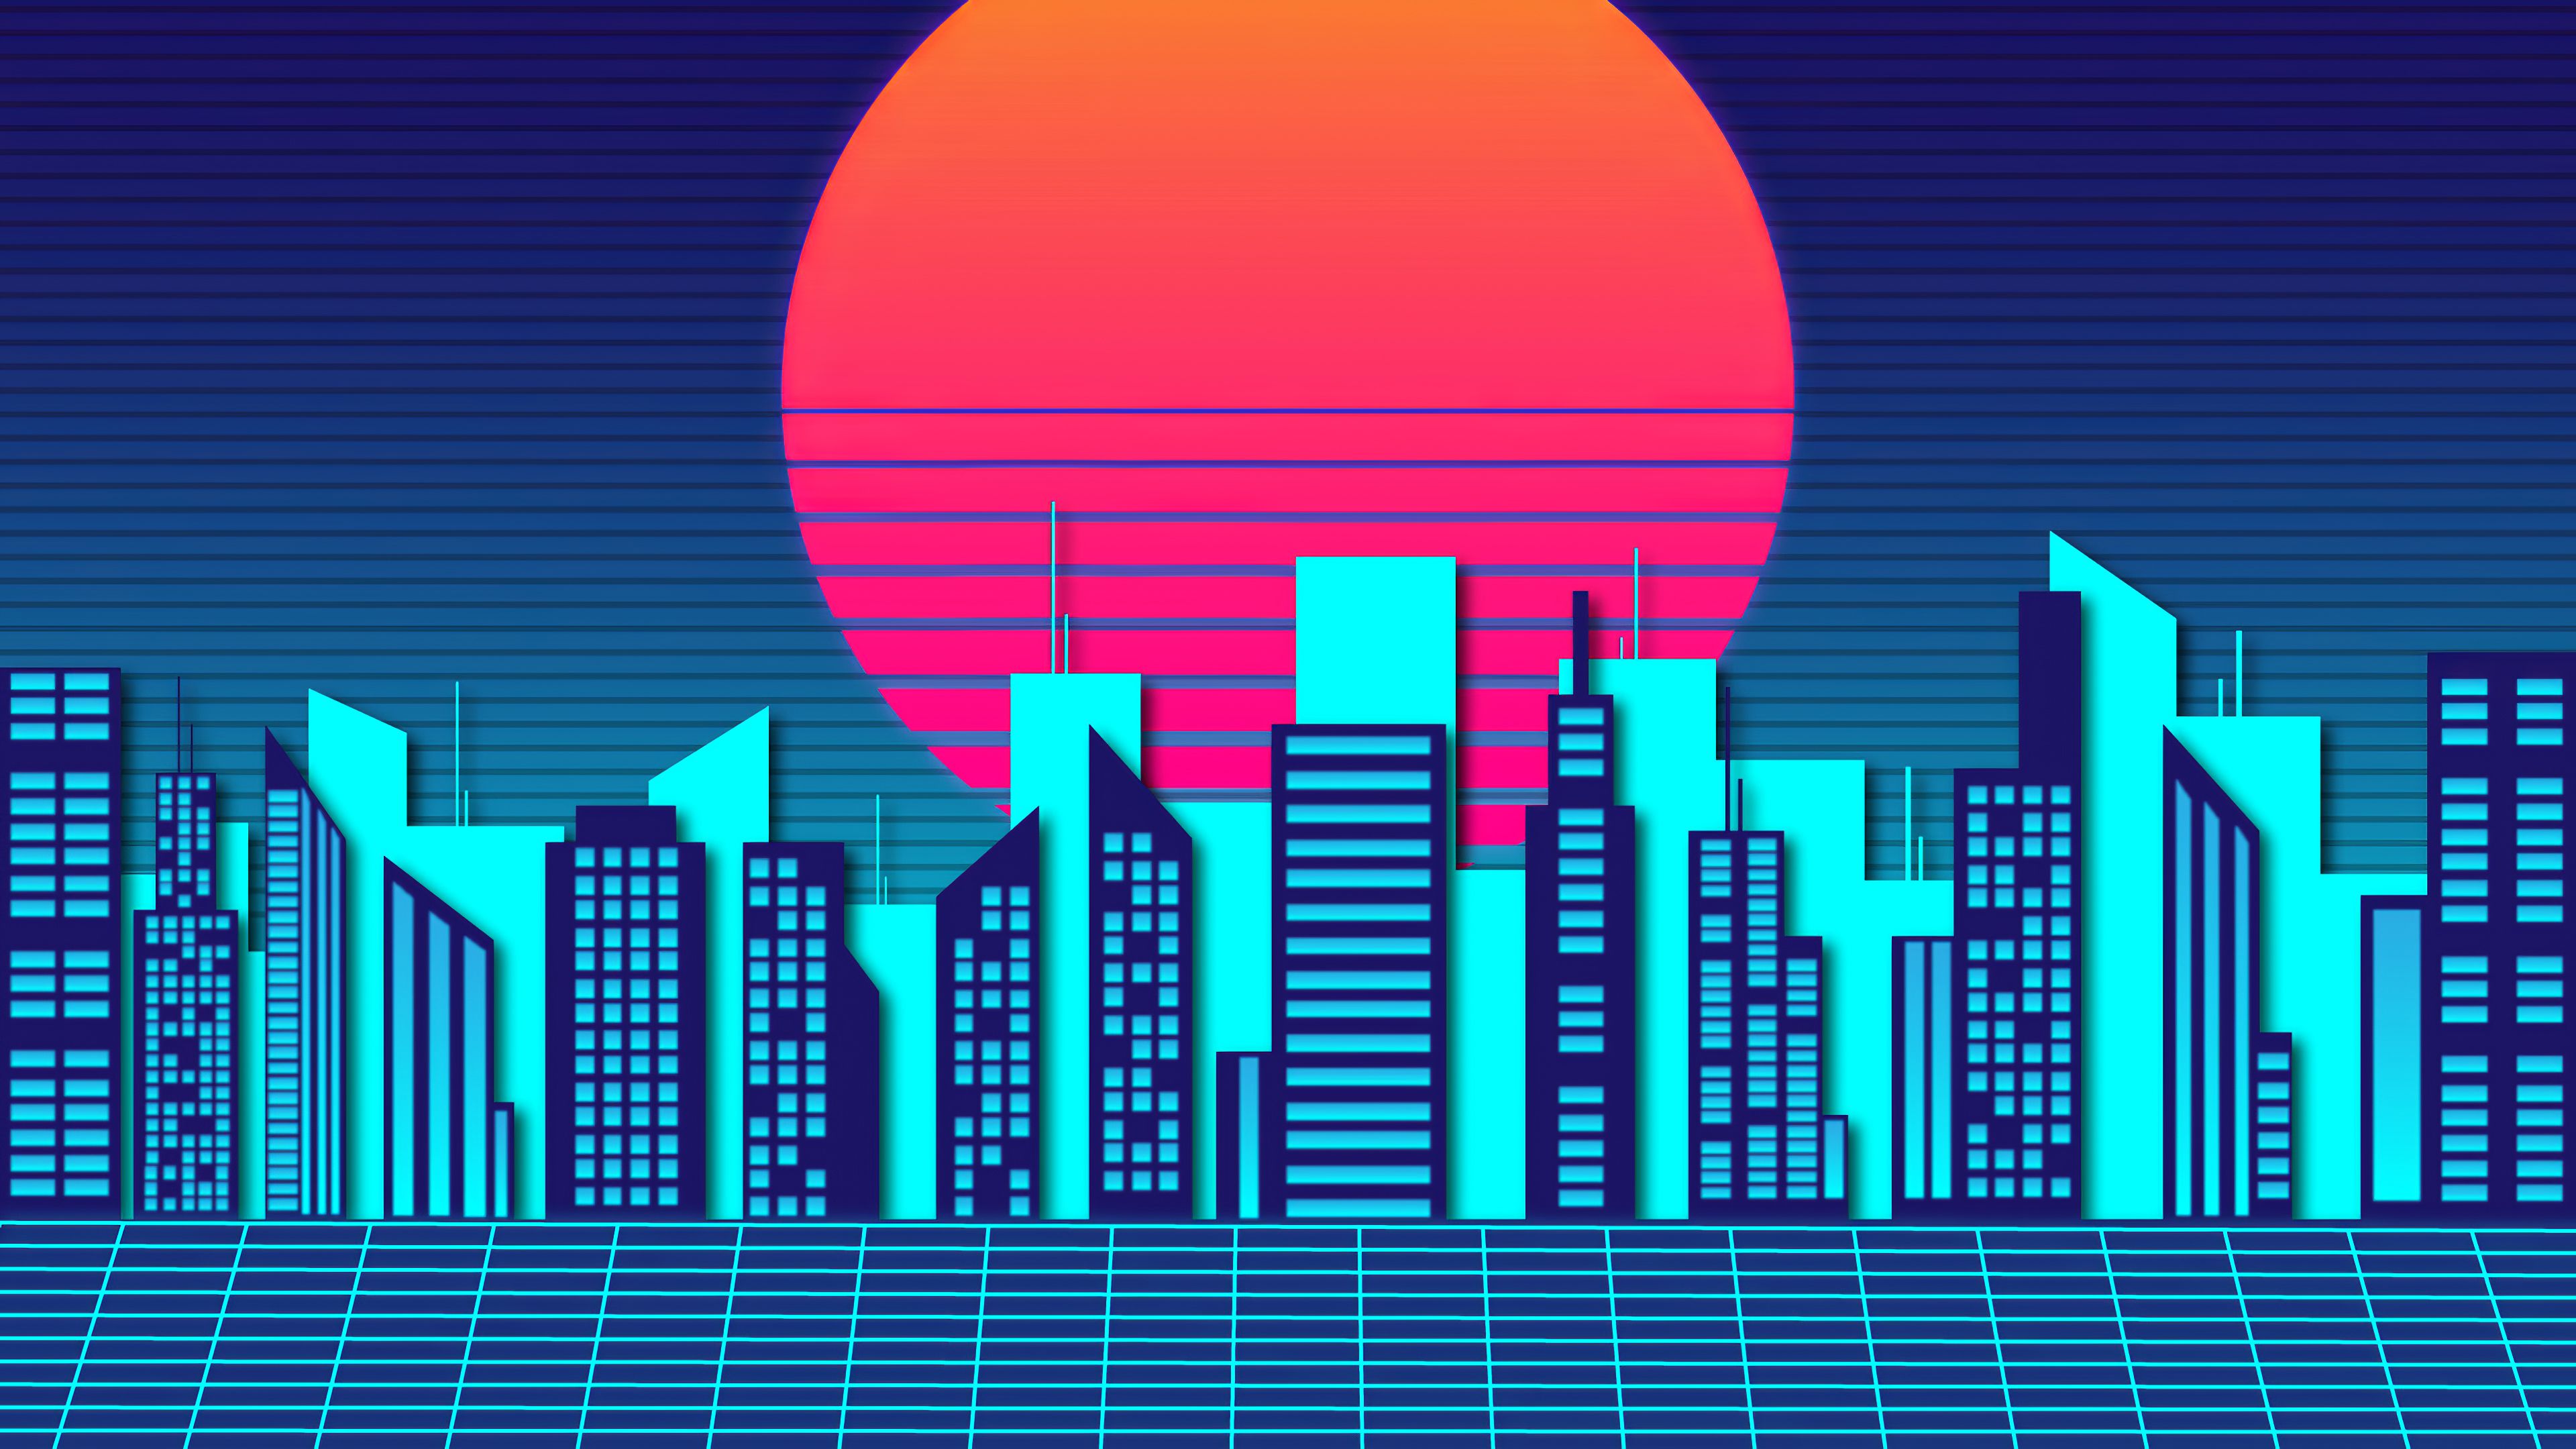 Retro City Wave 4k, HD Artist, 4k Wallpaper, Image, Background, Photo and Picture